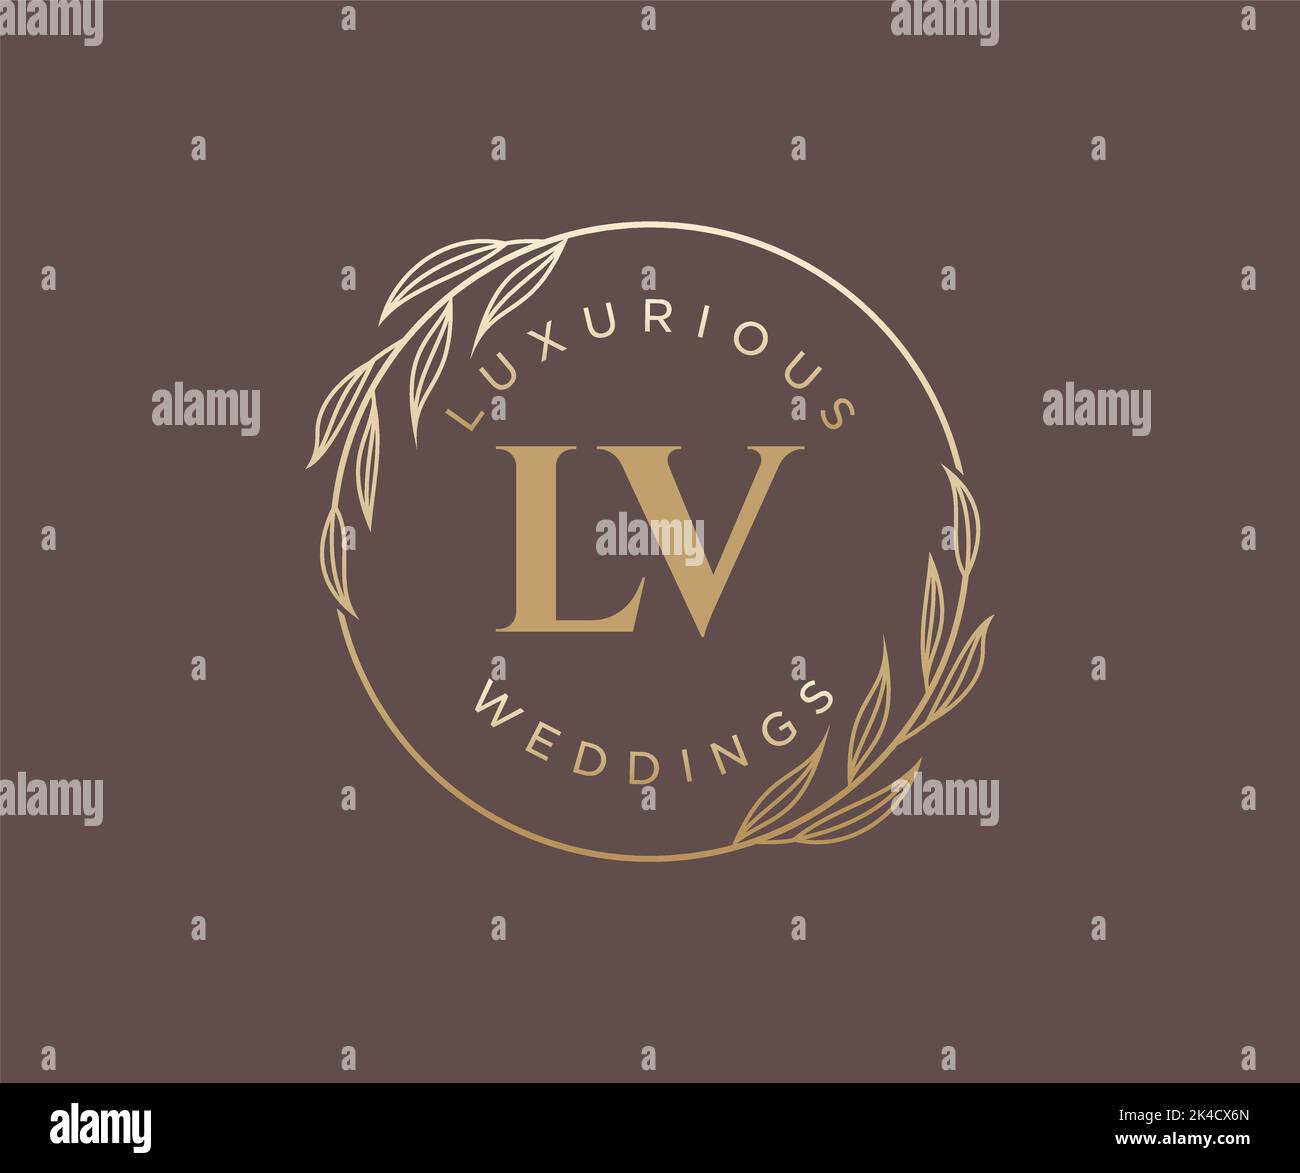 Lv L V White Yellow Gold Stock Vector (Royalty Free) 606579434